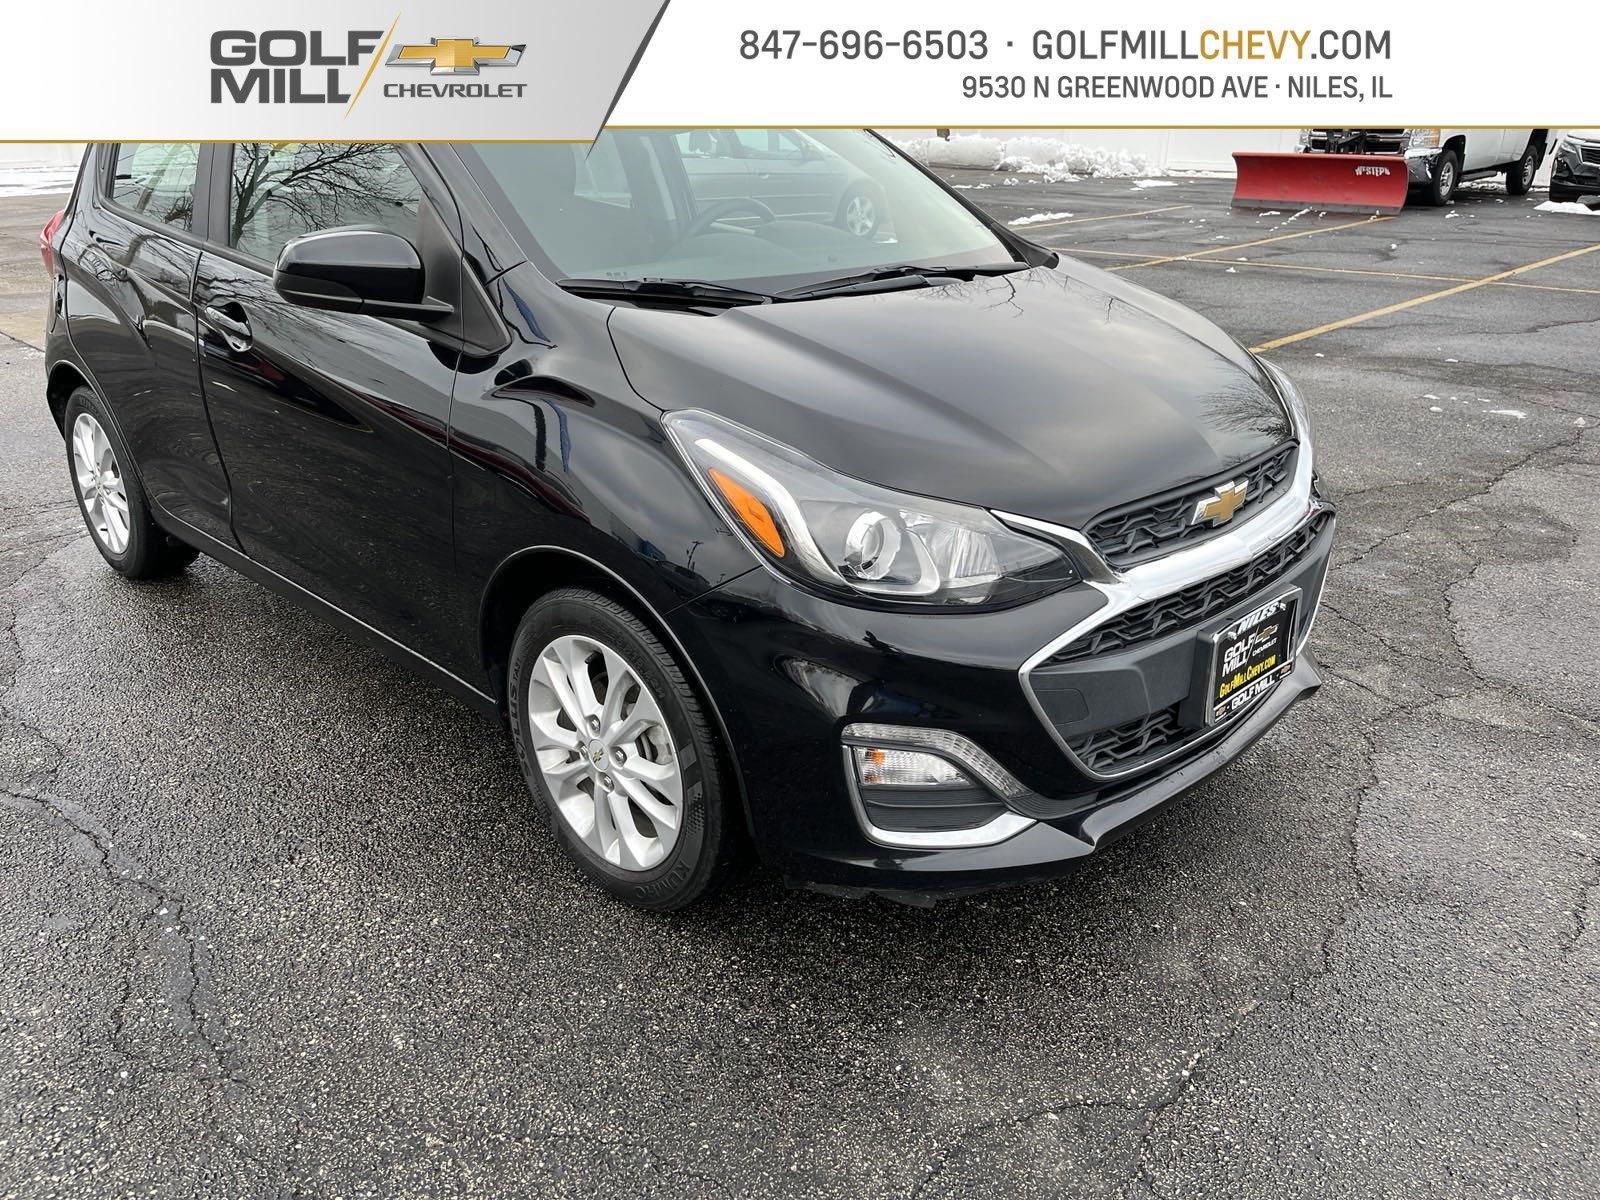 2020 Chevrolet Spark Vehicle Photo in Plainfield, IL 60586